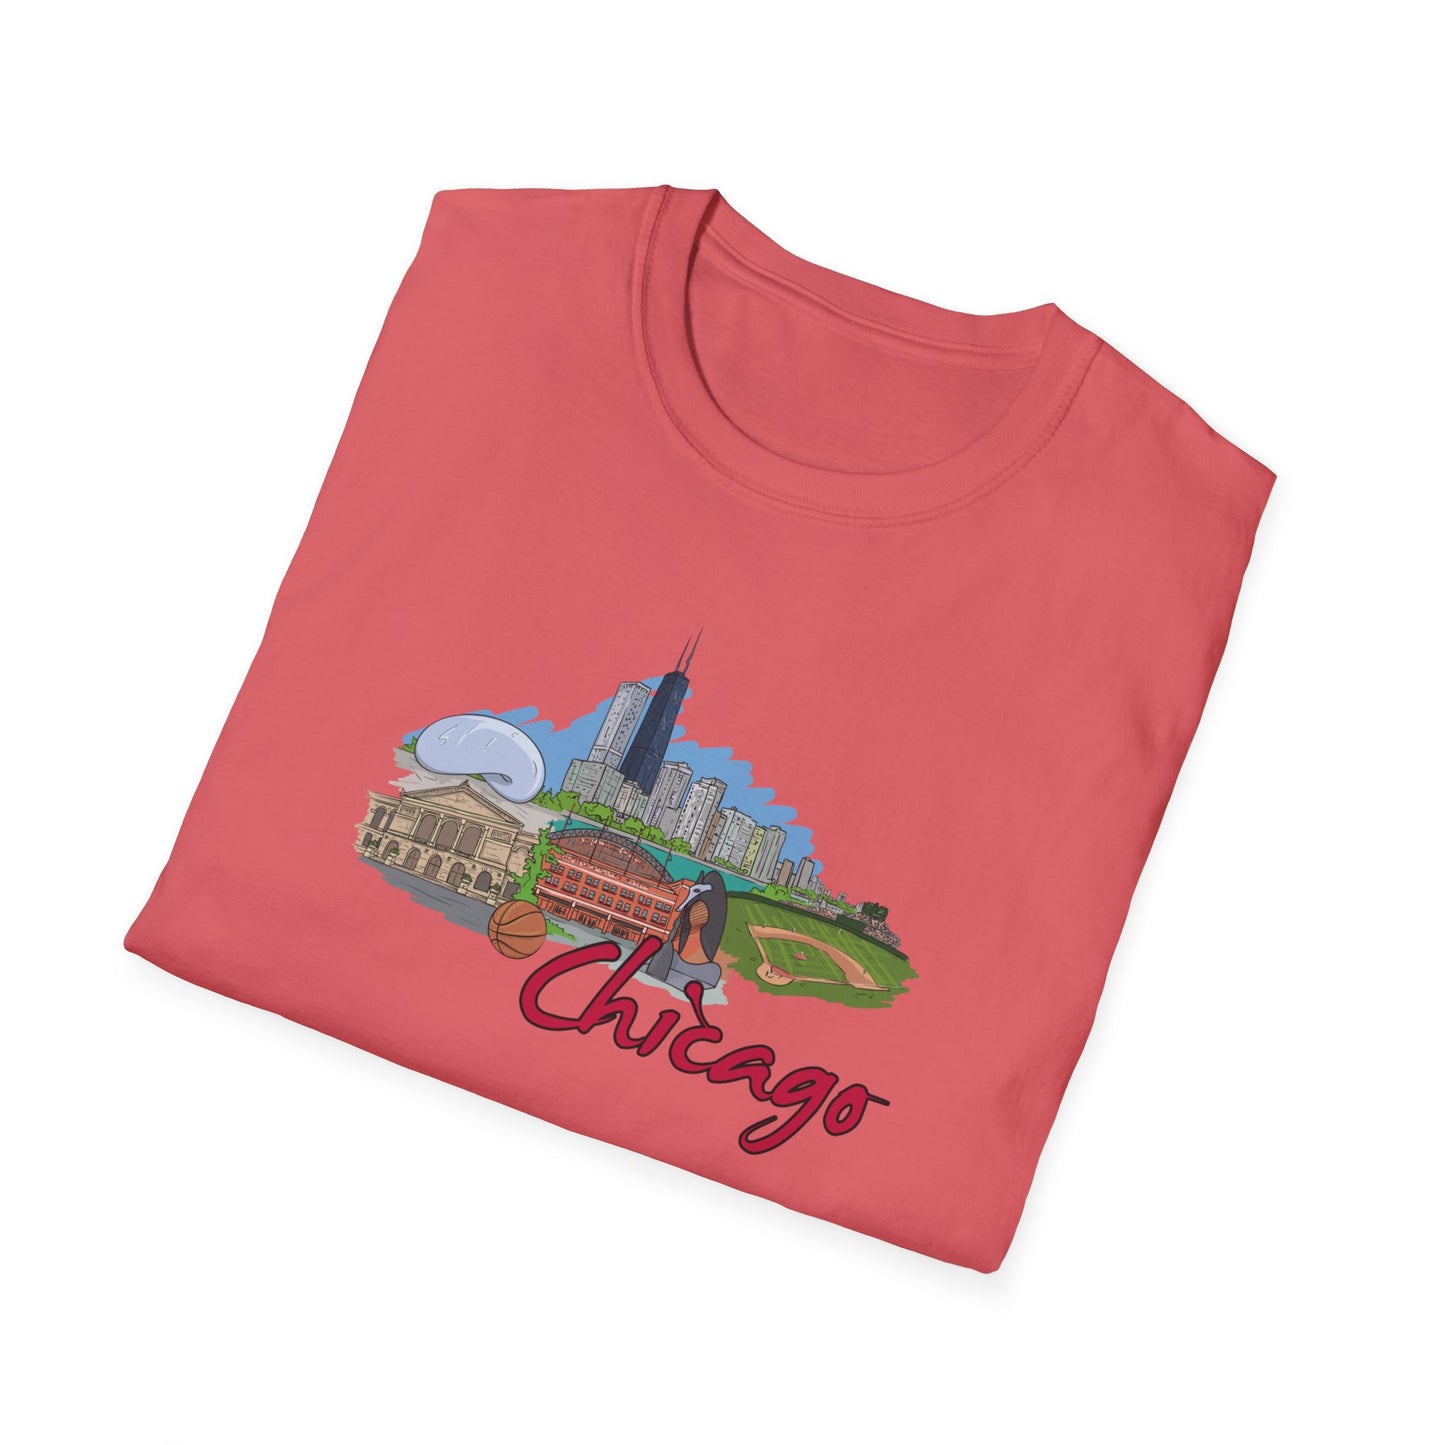 Explore the Windy City Vibes with Our Stylish Chicago-Inspired T-Shirt